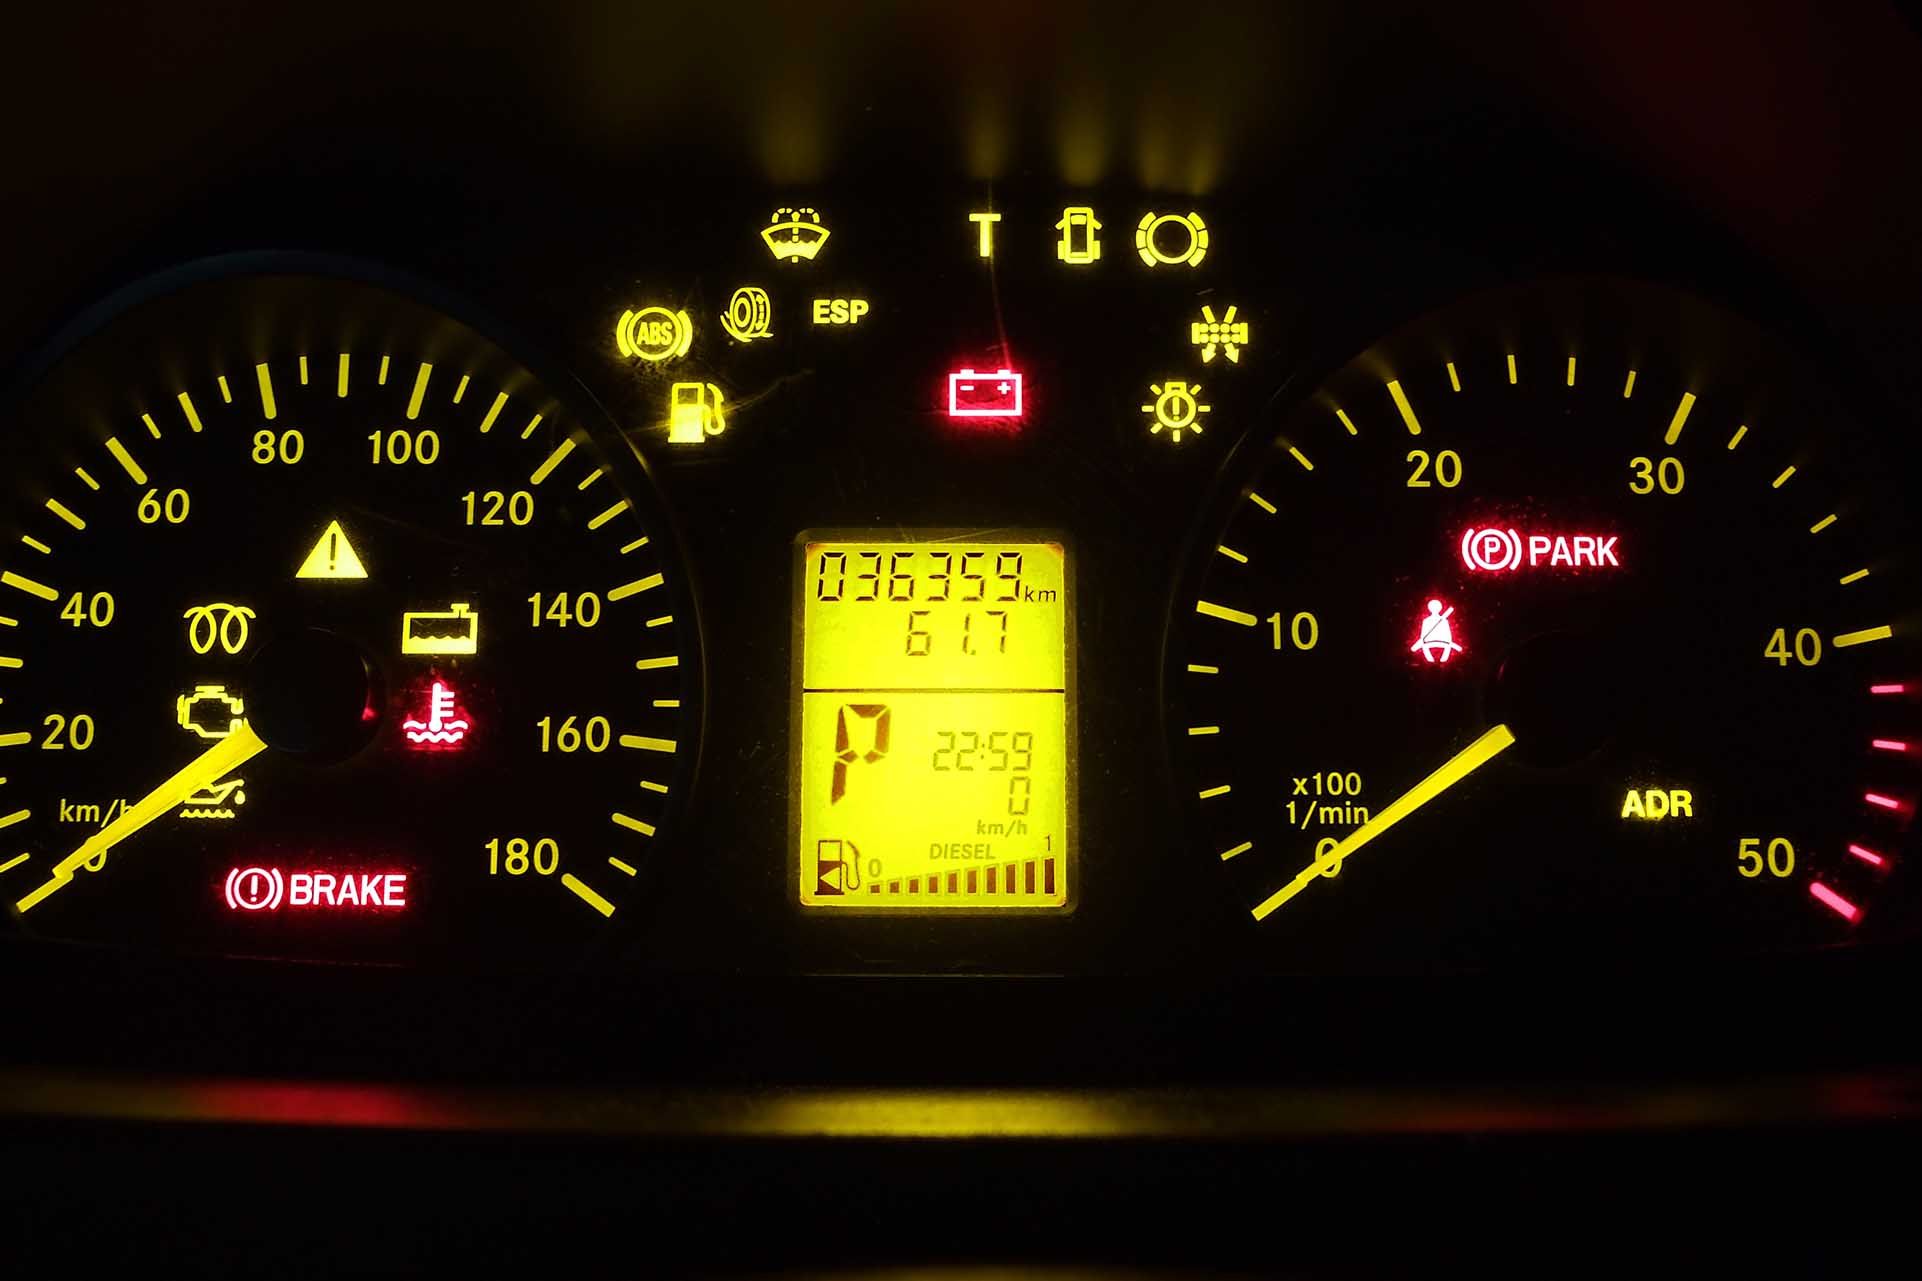 on Twitter: "What all those dashboard lights on your car actually mean: https://t.co/C9prBntwxc https://t.co/WsSYjLzXZm" /